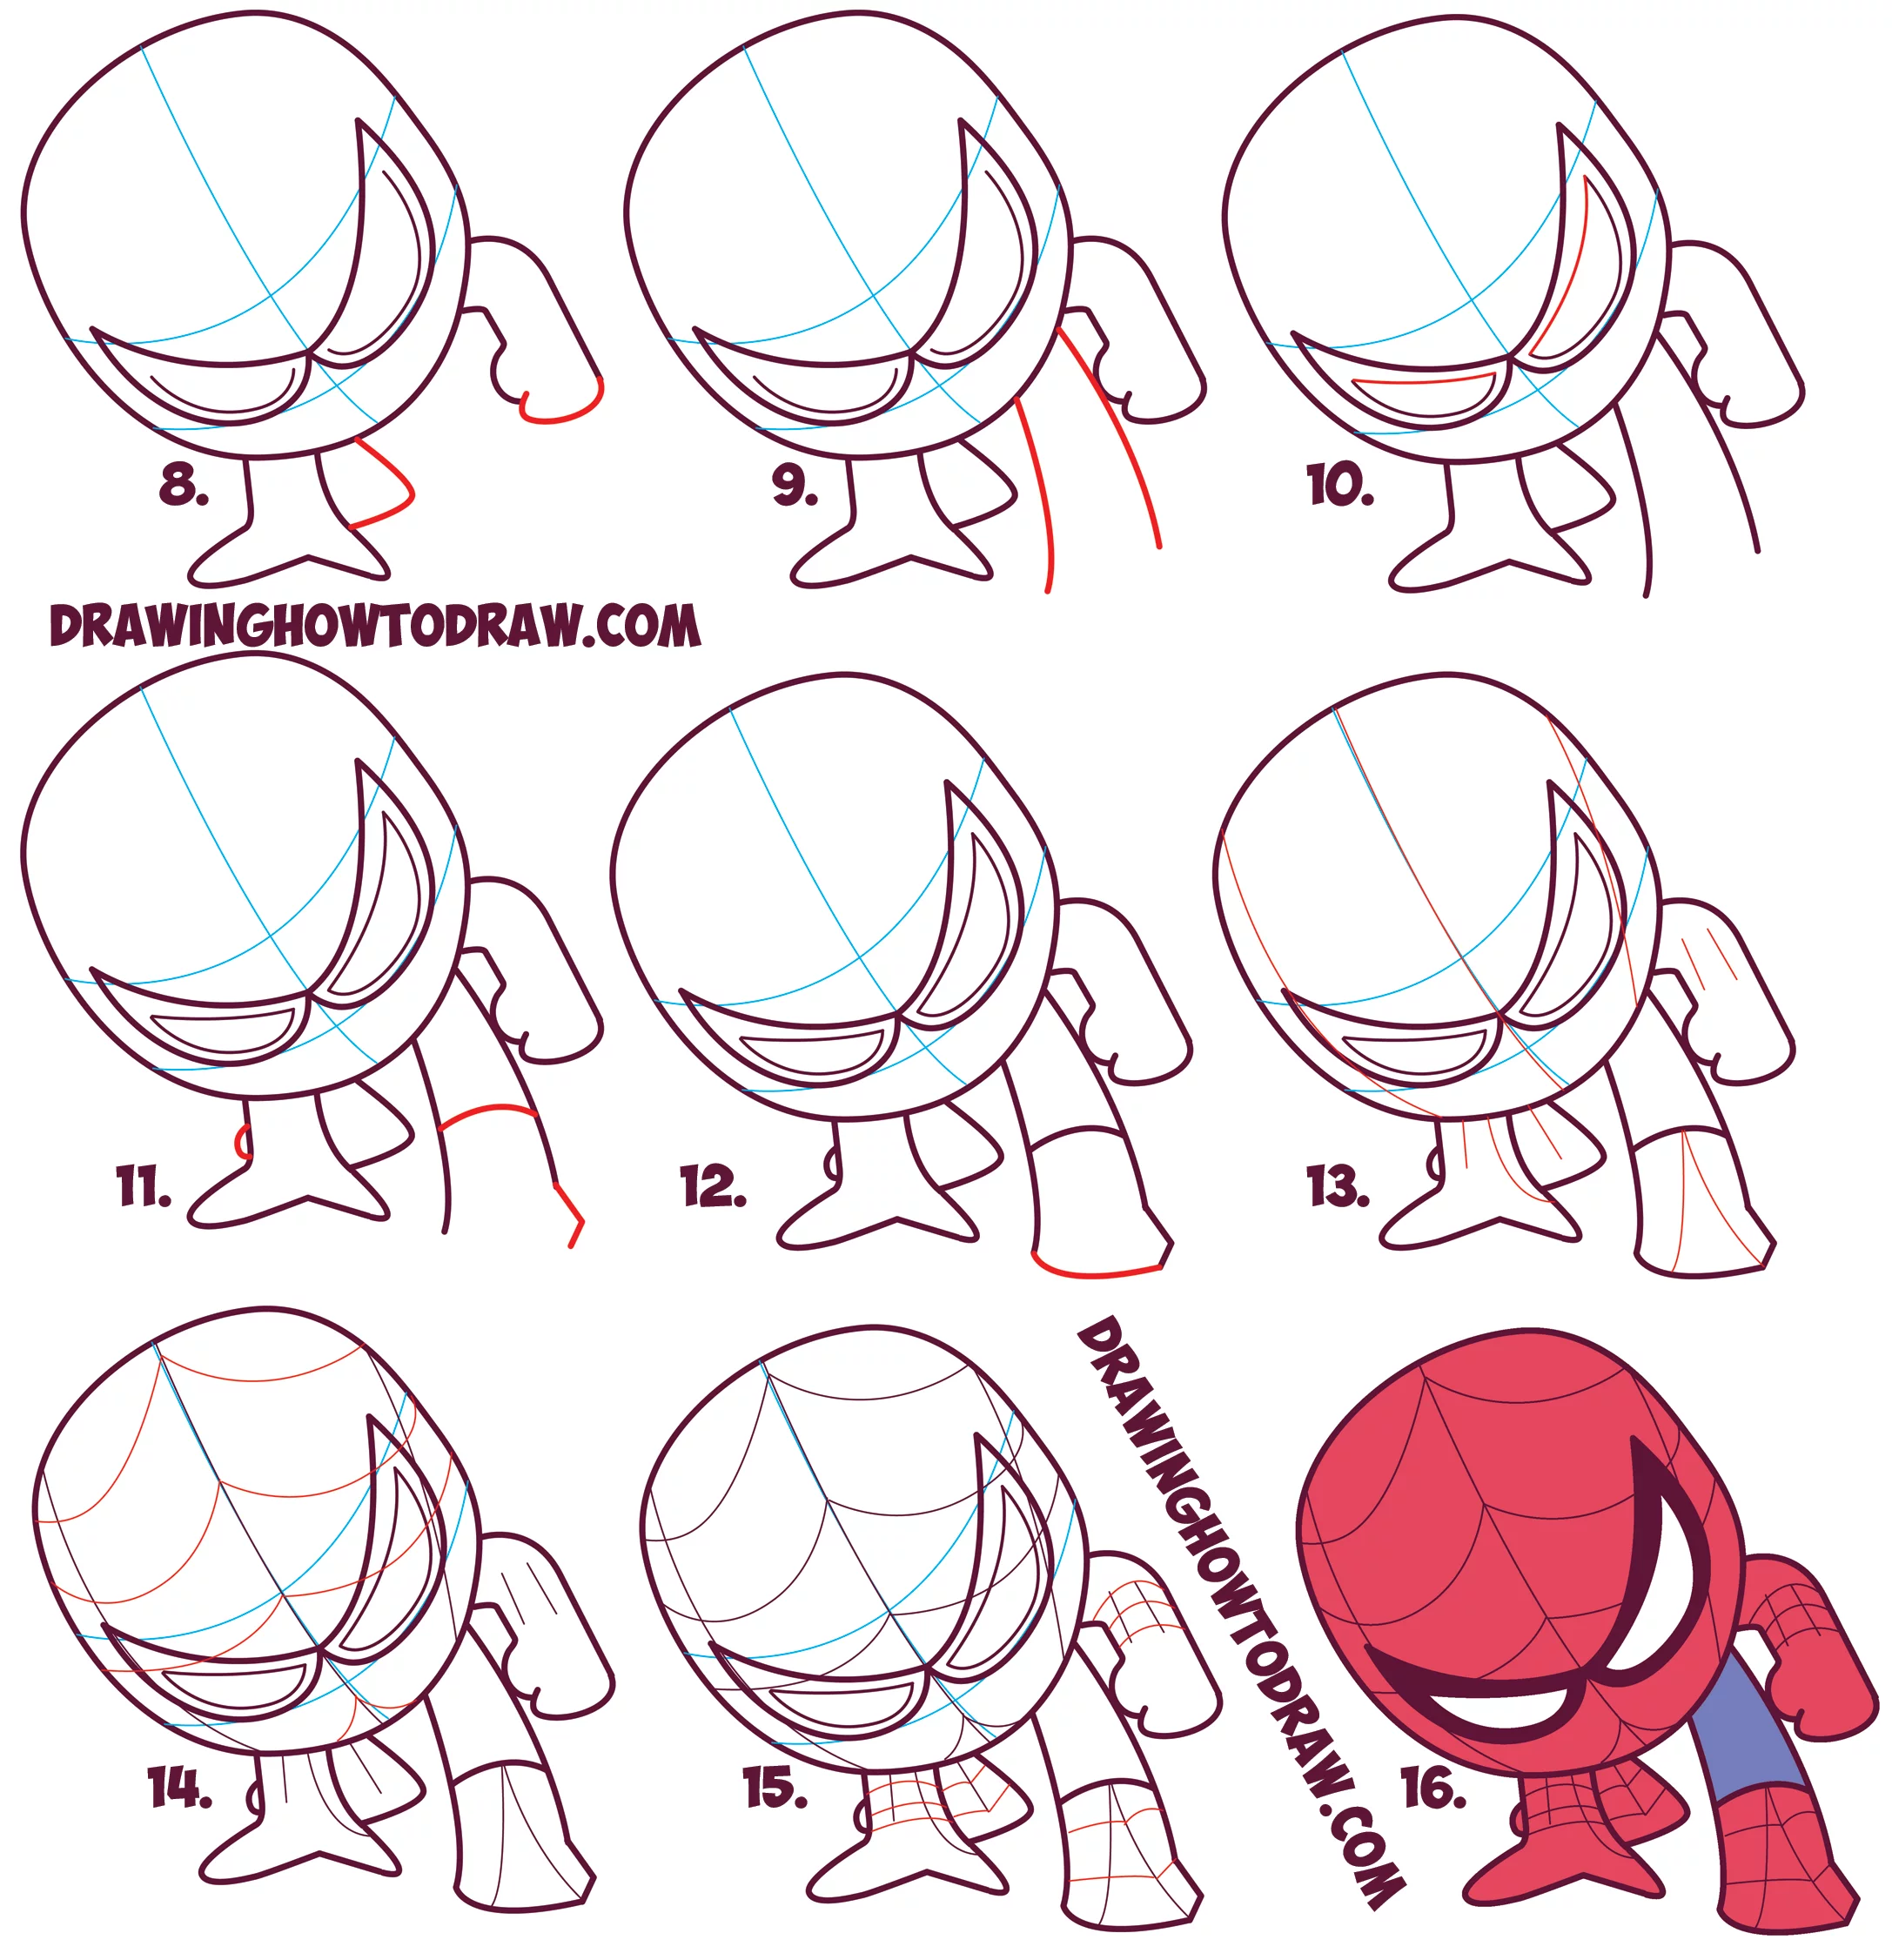 Spider - Man PS4 drawing tutorial easy by draw2night on DeviantArt-saigonsouth.com.vn